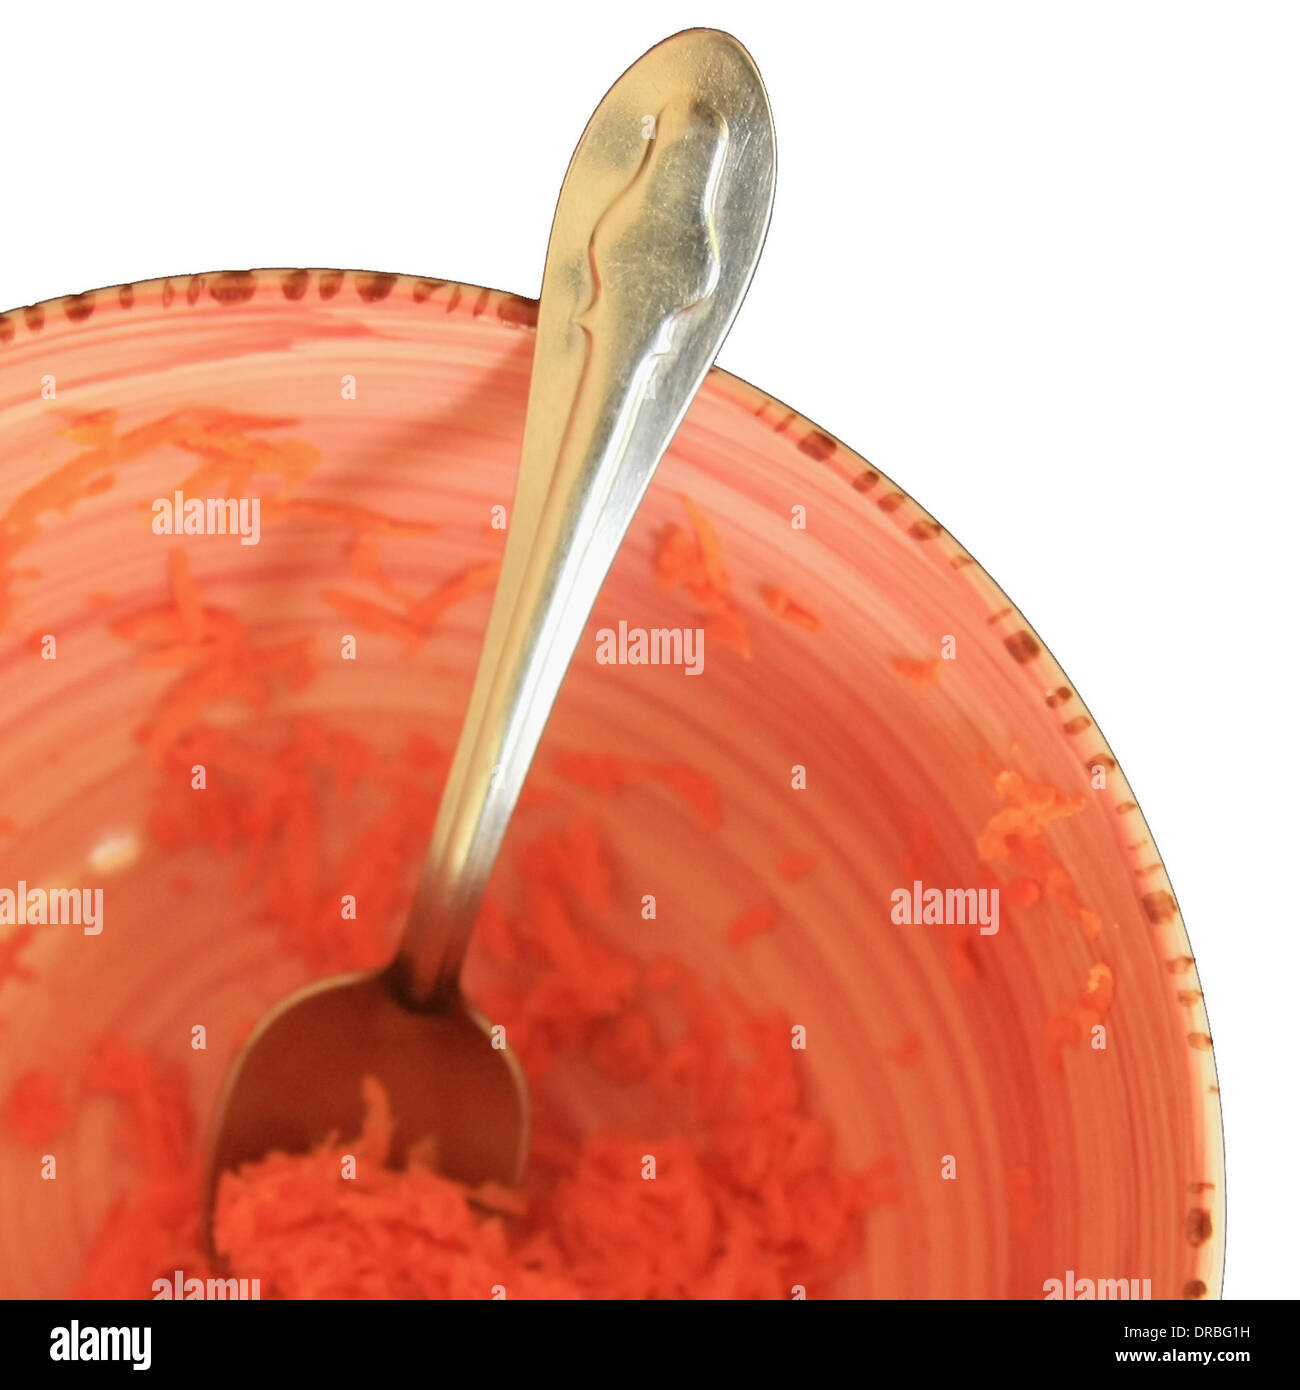 Detail of grated carrots in a bowl isolated on white background Stock Photo